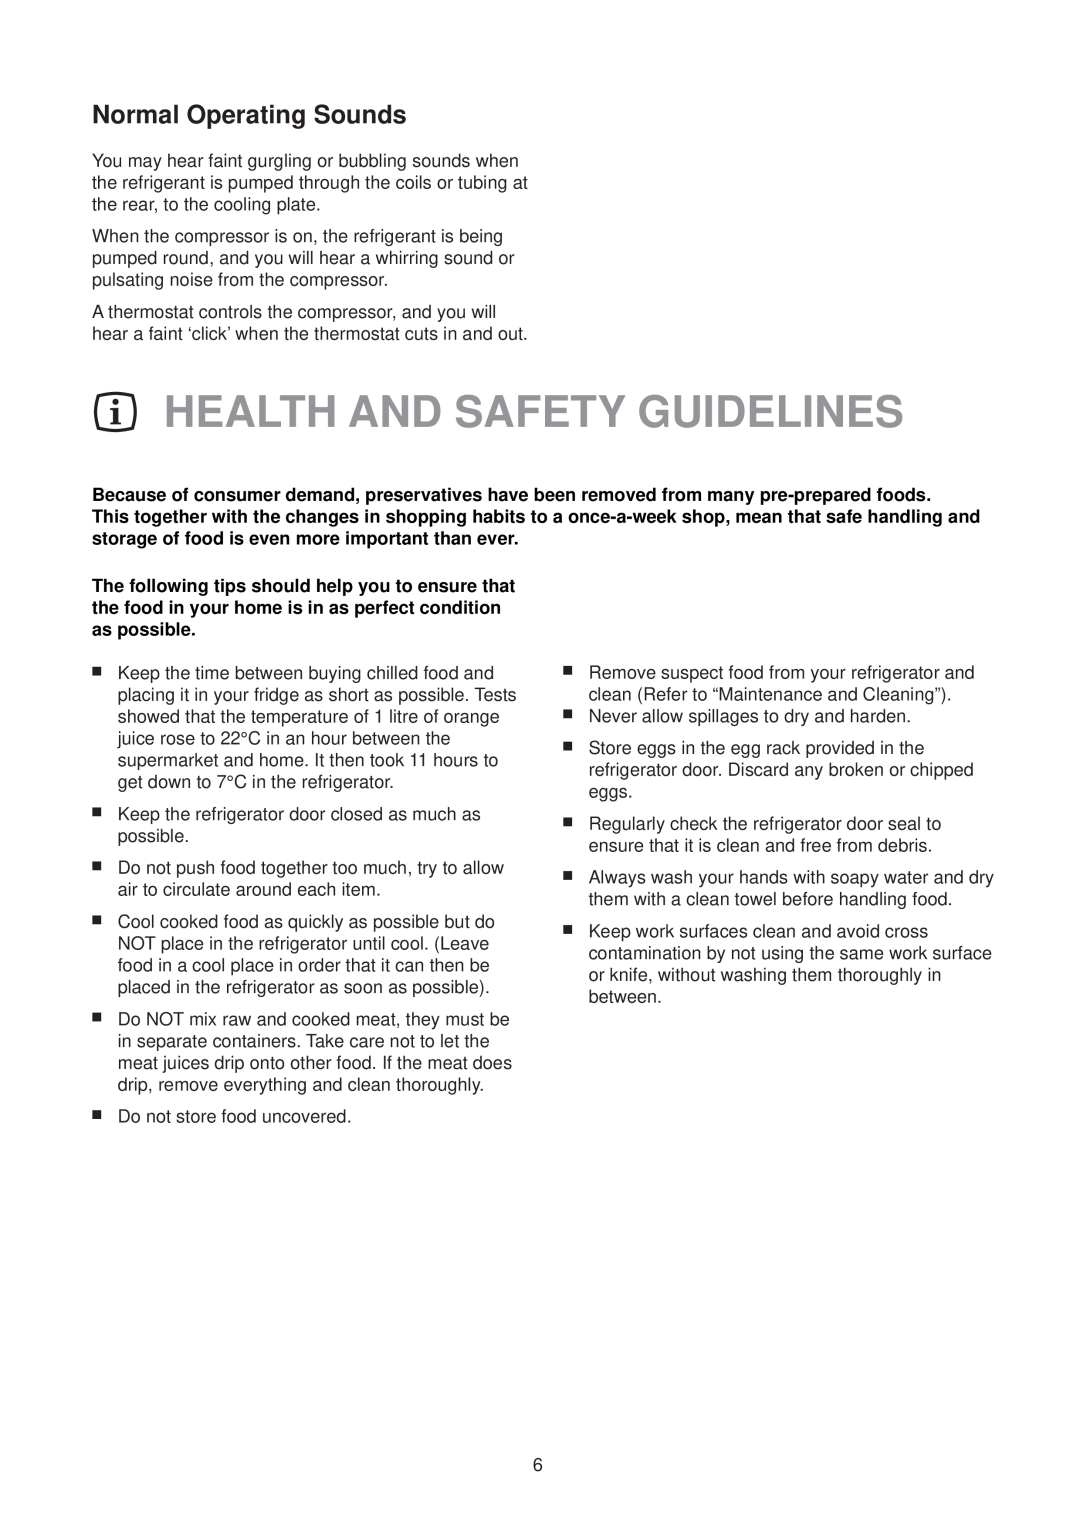 Electrolux U21312 manual Health And Safety Guidelines, Normal Operating Sounds 